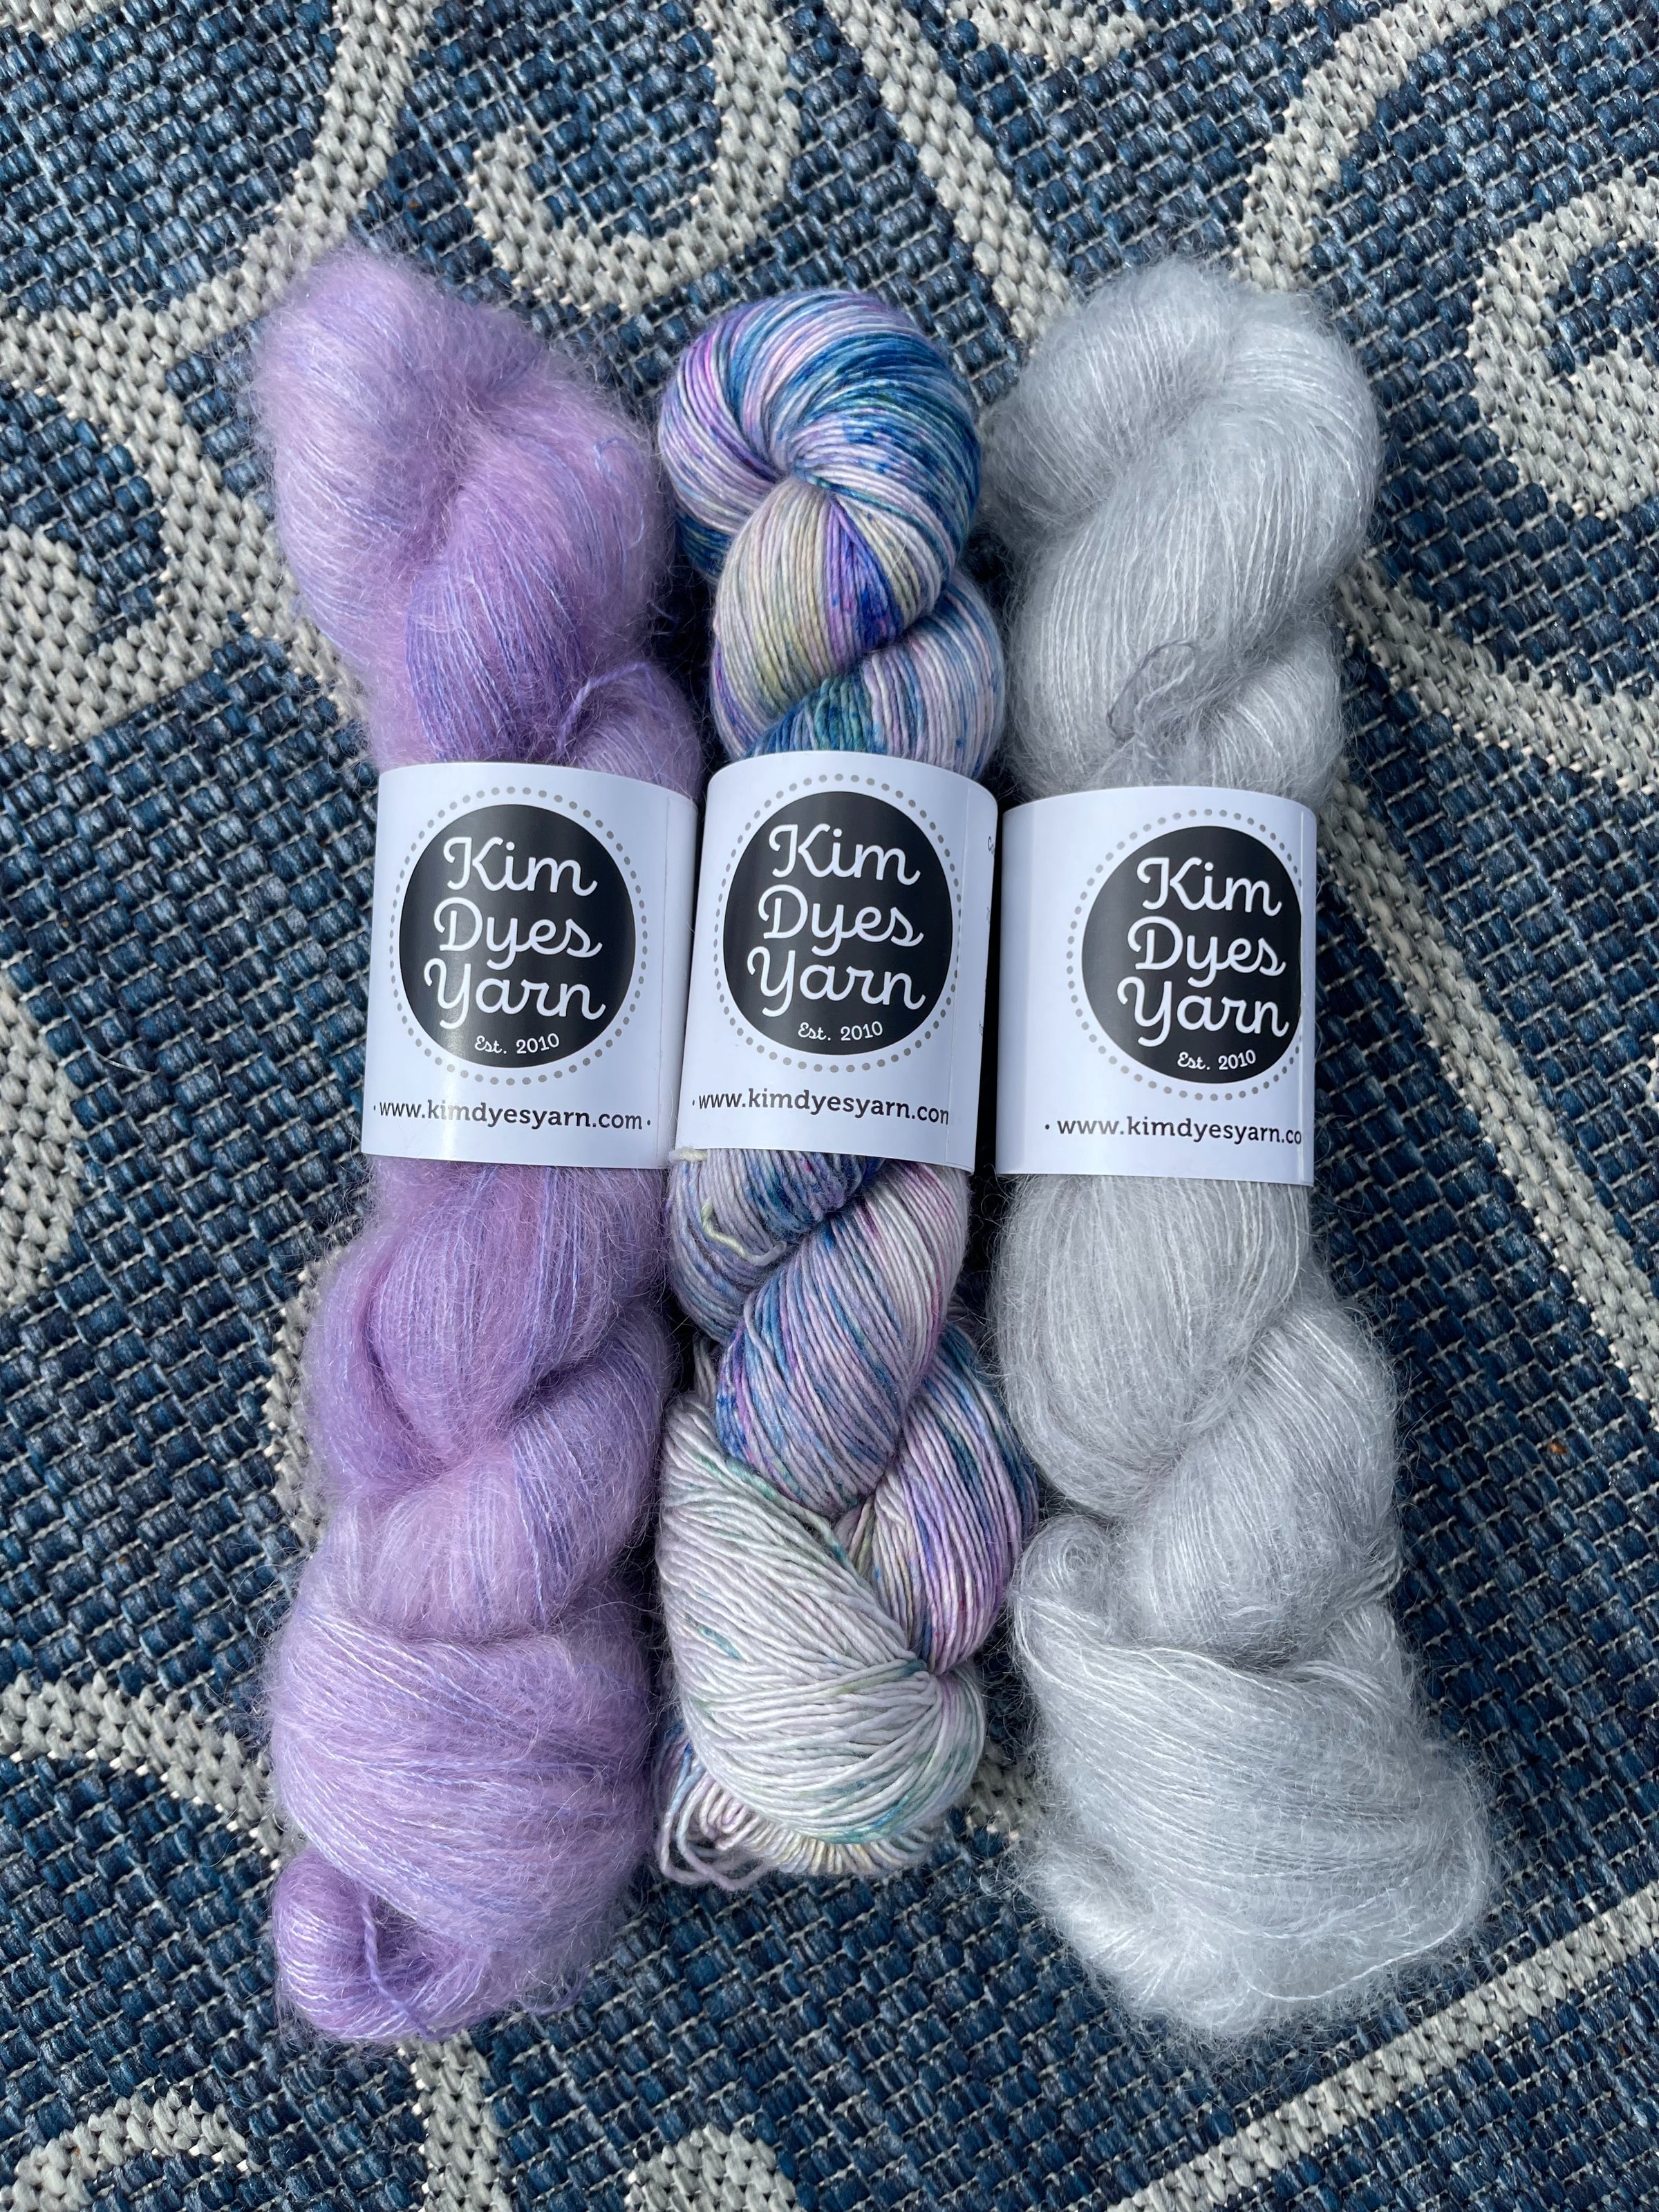 SKEIN COCAINE Yarn Crawl 2023 Special - Magpie Knits